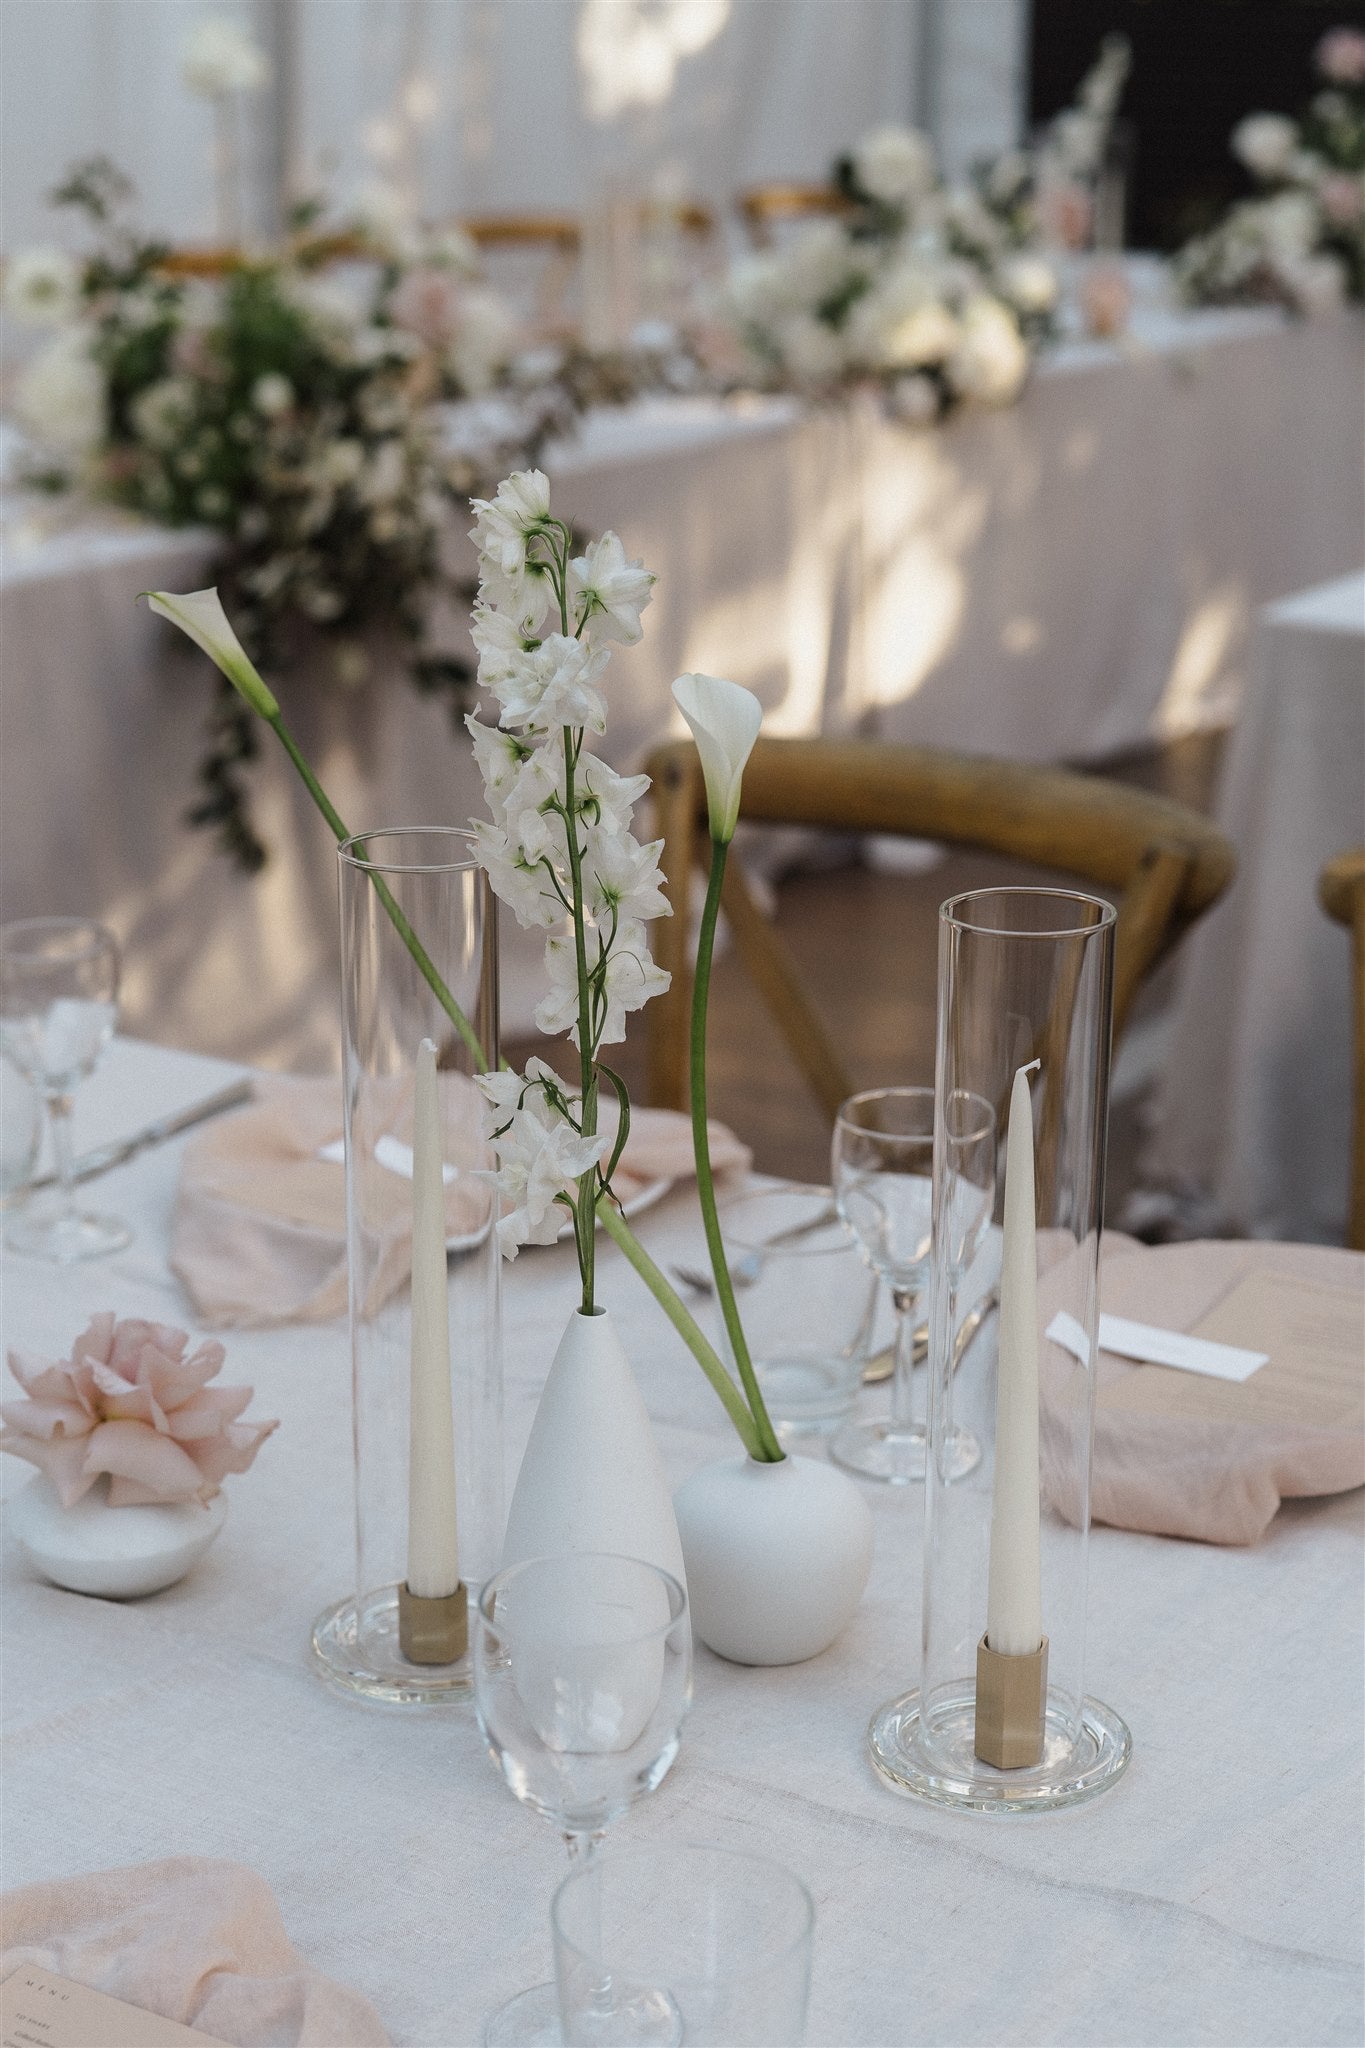 Glass Candle Drip Trays For Hire | For Love & Living Gold Coast Weddings & Events